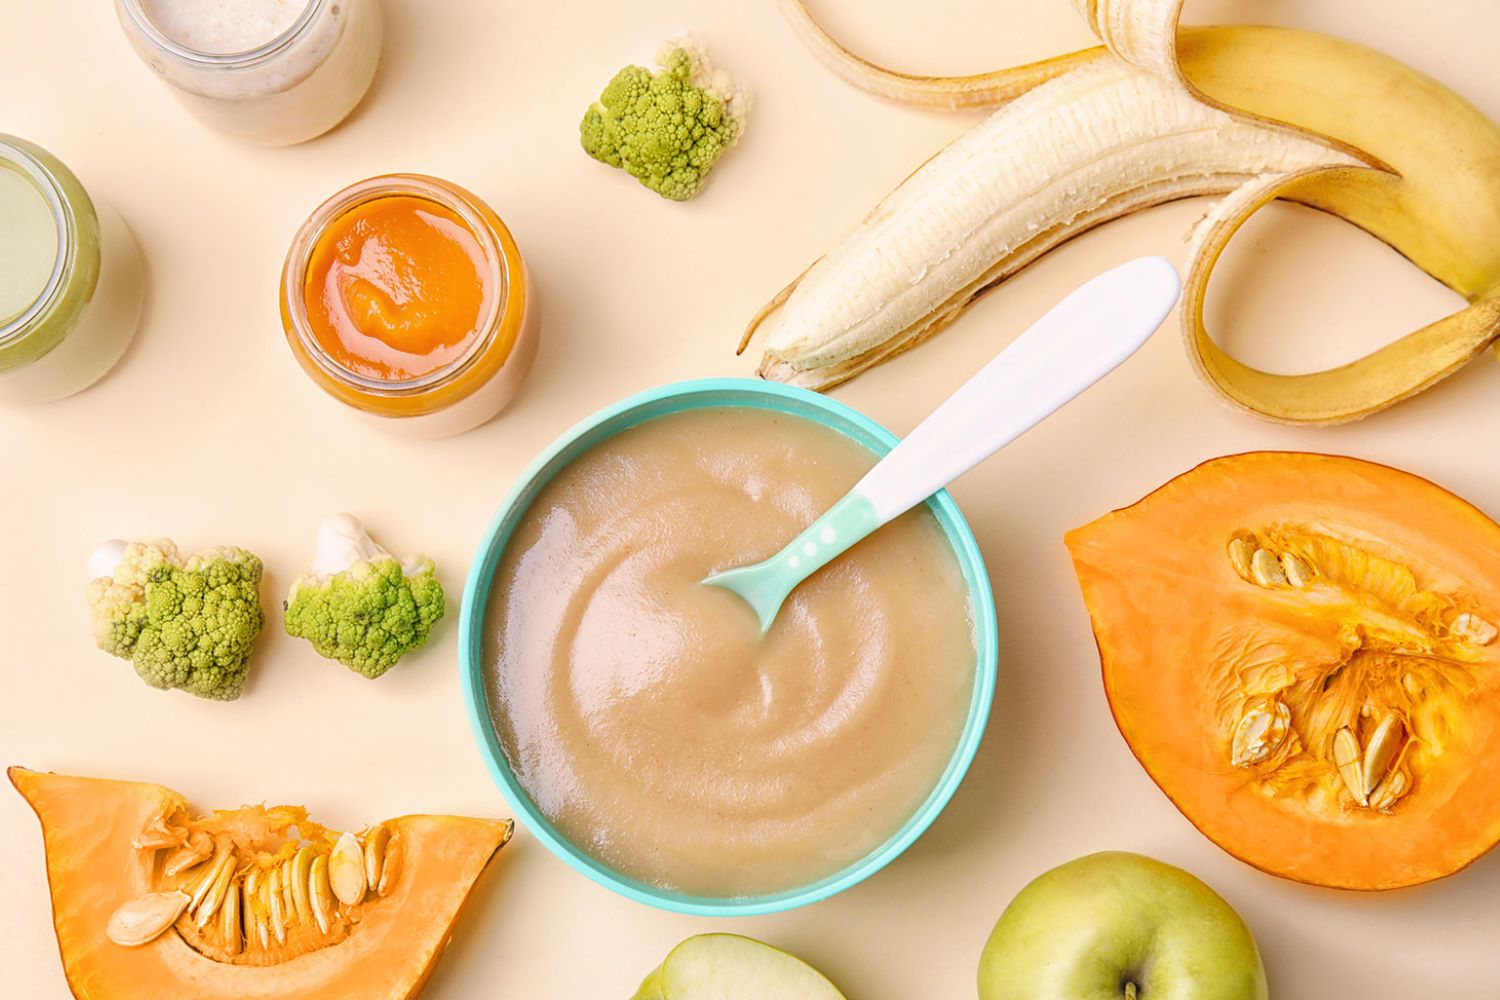 How To Store Homemade Baby Food